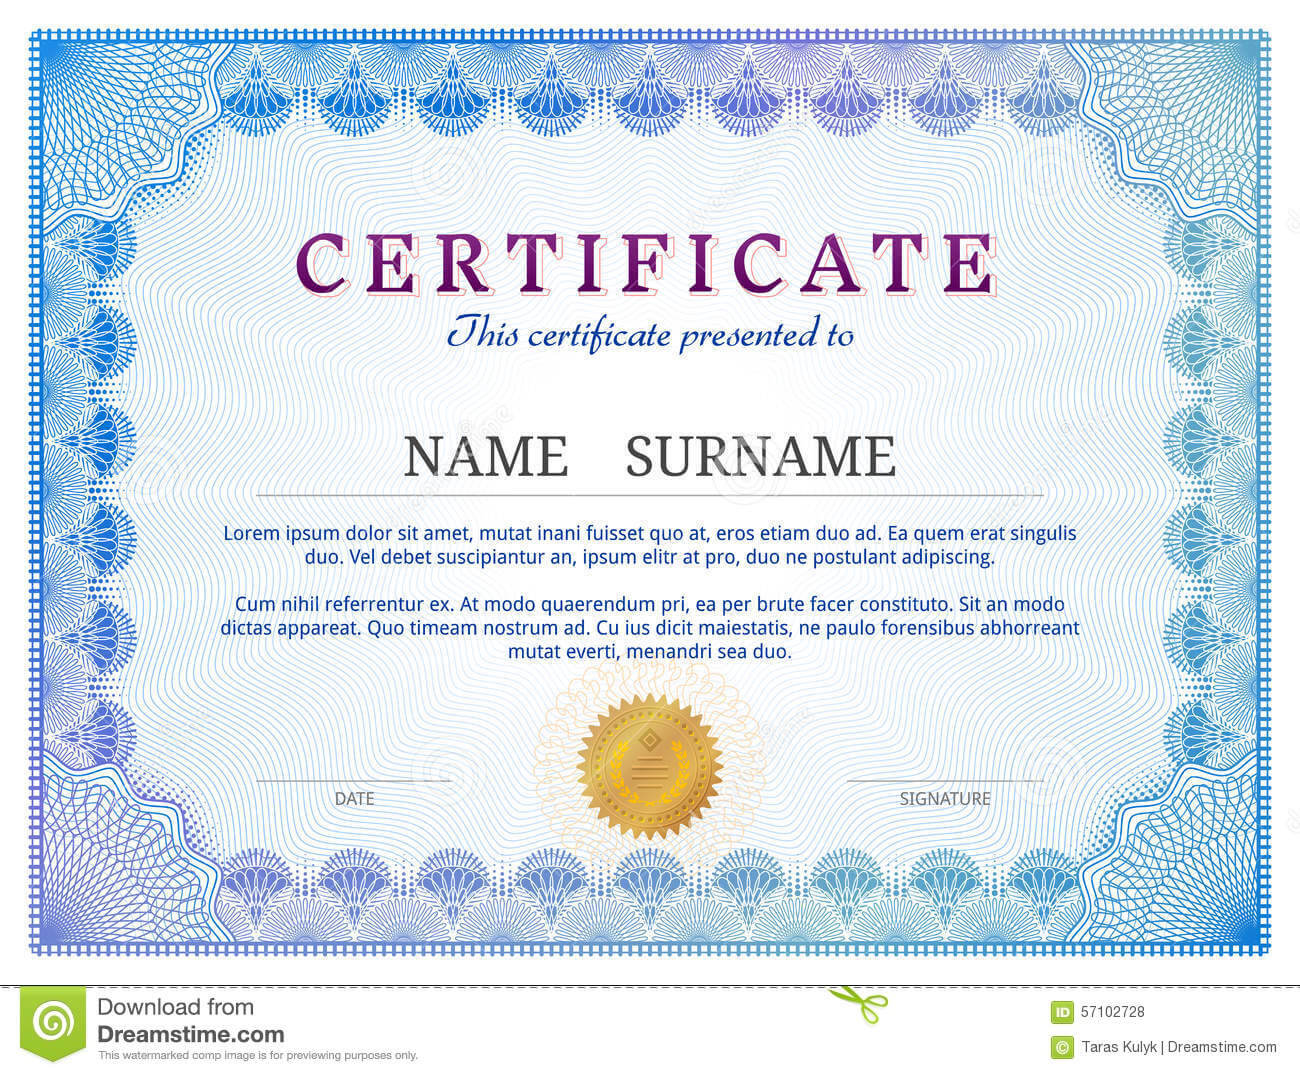 Certificate Template With Guilloche Elements Stock Vector In Validation Certificate Template